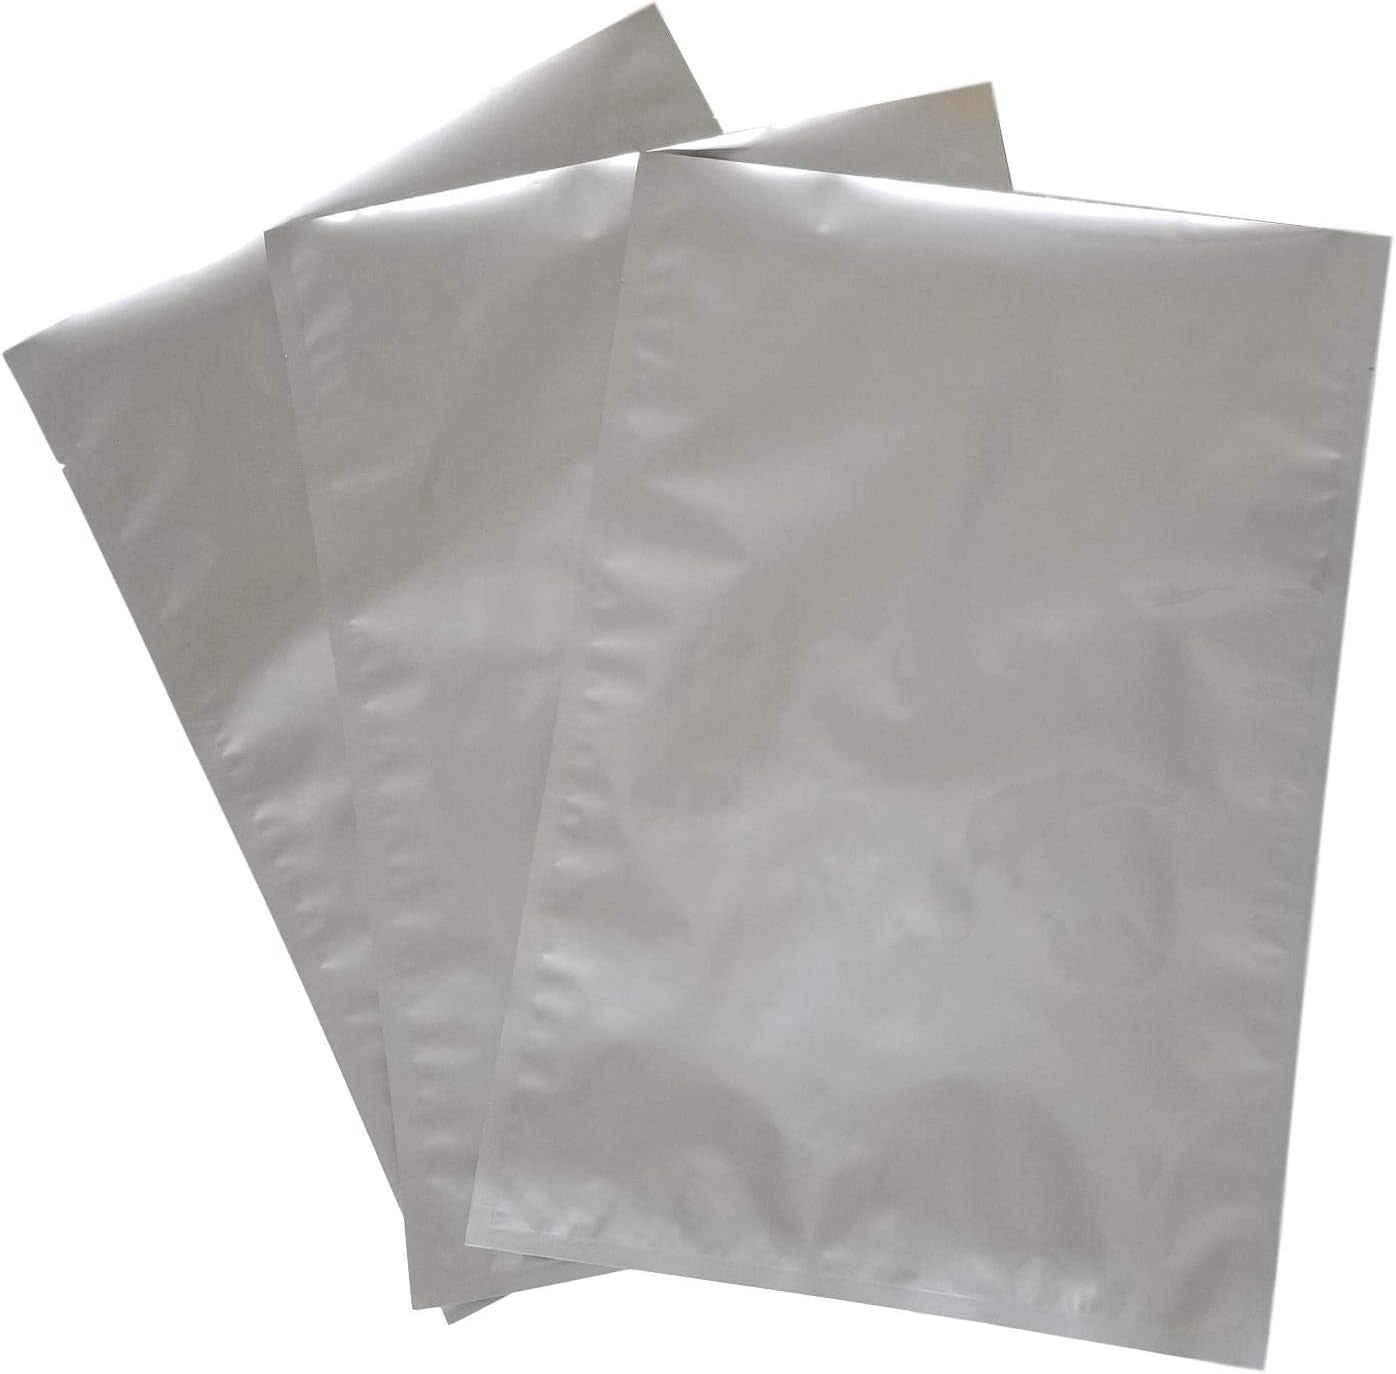 (50) - 2 Gallon Shieldpro (14"X20") 5 Mil Thick Mylar Bags for Long Term Emergency Food Storage Supply Disposable Food Storage Food Storage Bags Health & Household Household Supplies Paper & Plastic